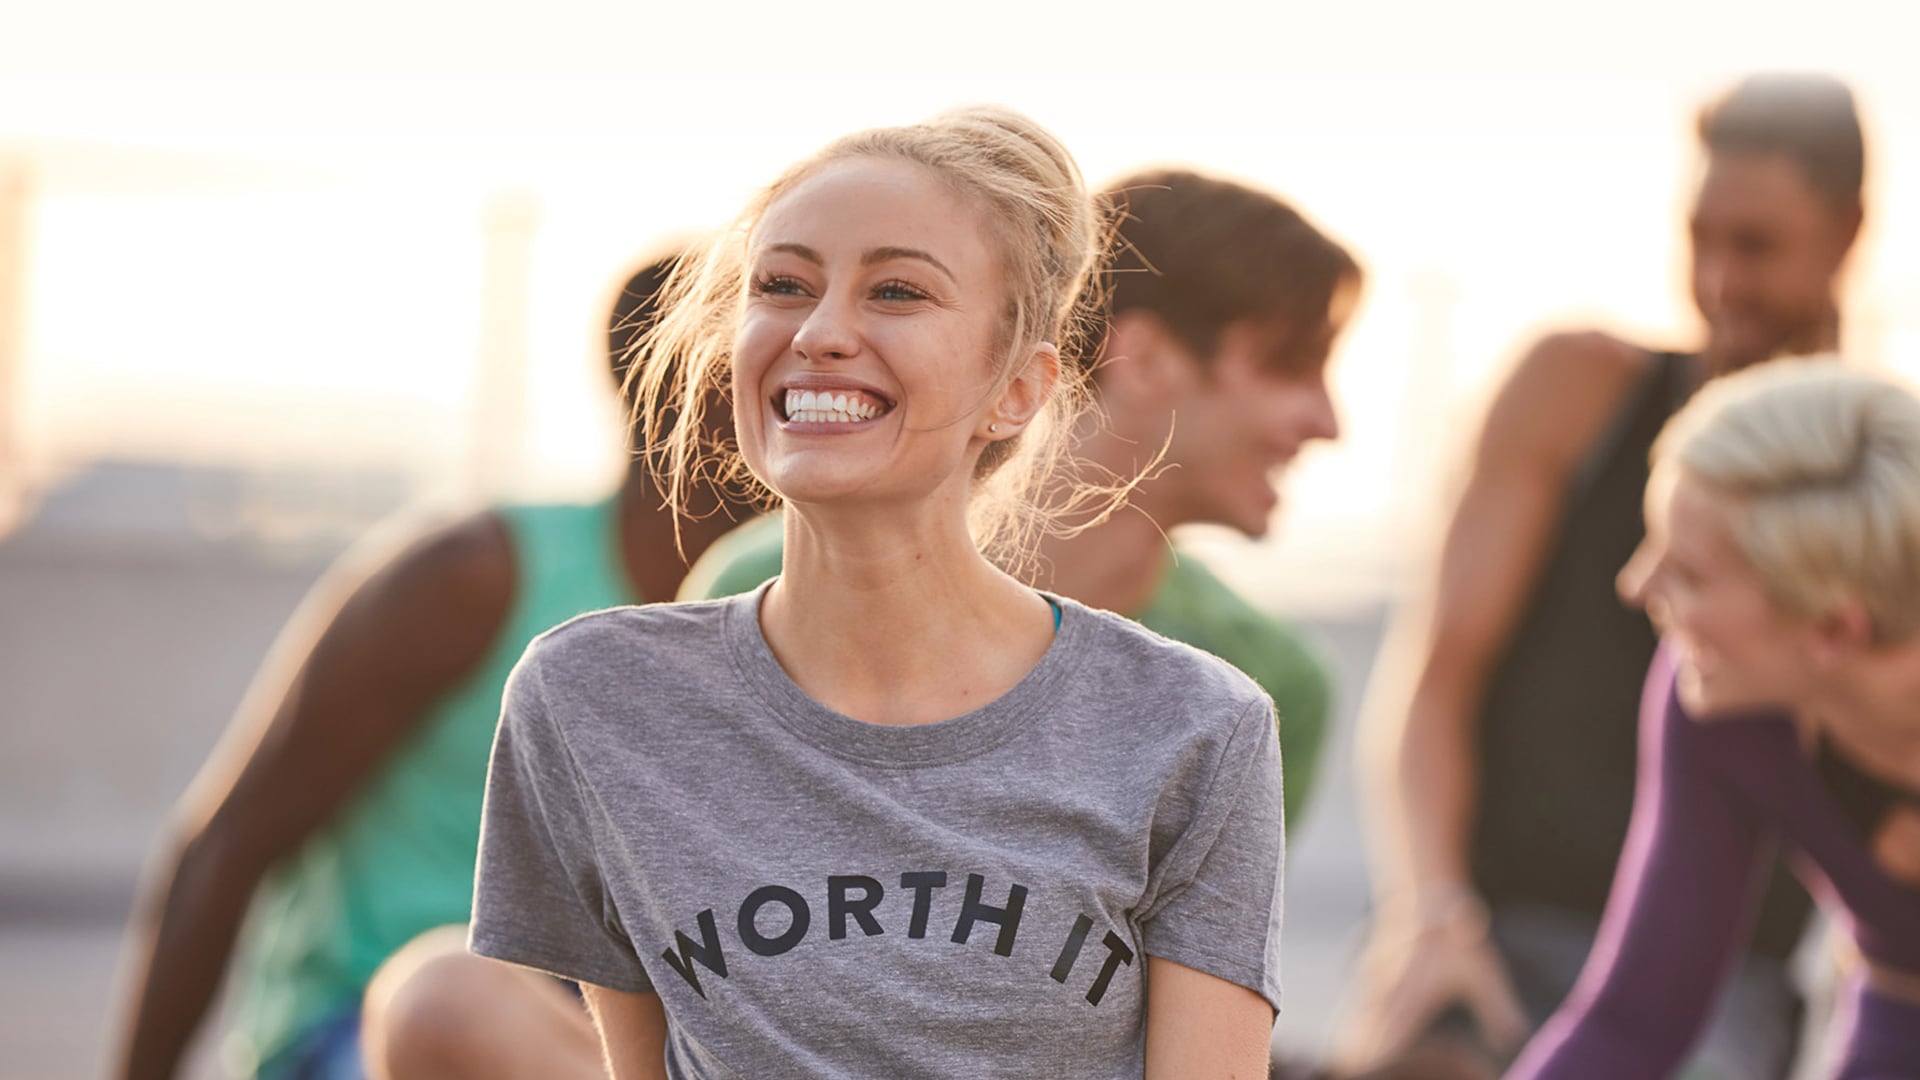 A young woman wearing a grey t-shirt that says "Worth it" smiles as an engaged group smile and laugh behind her.